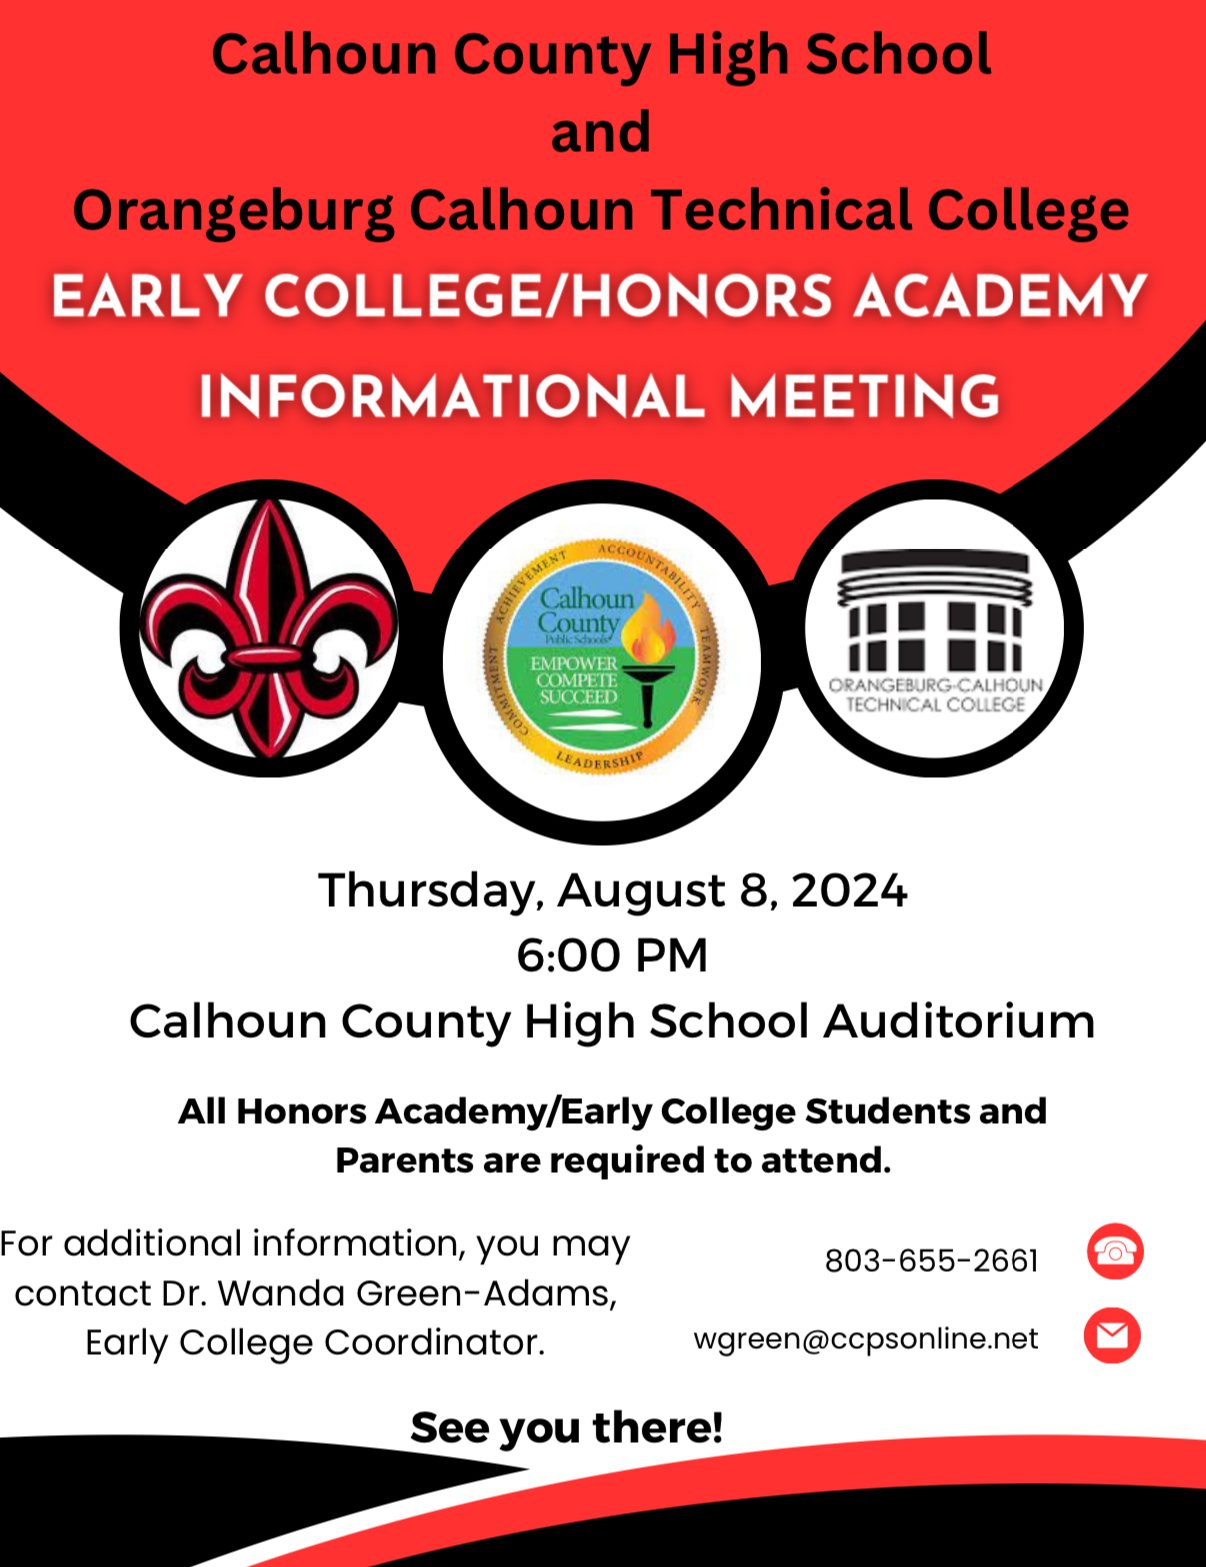 Early College and Honors Academy Informational Meeting